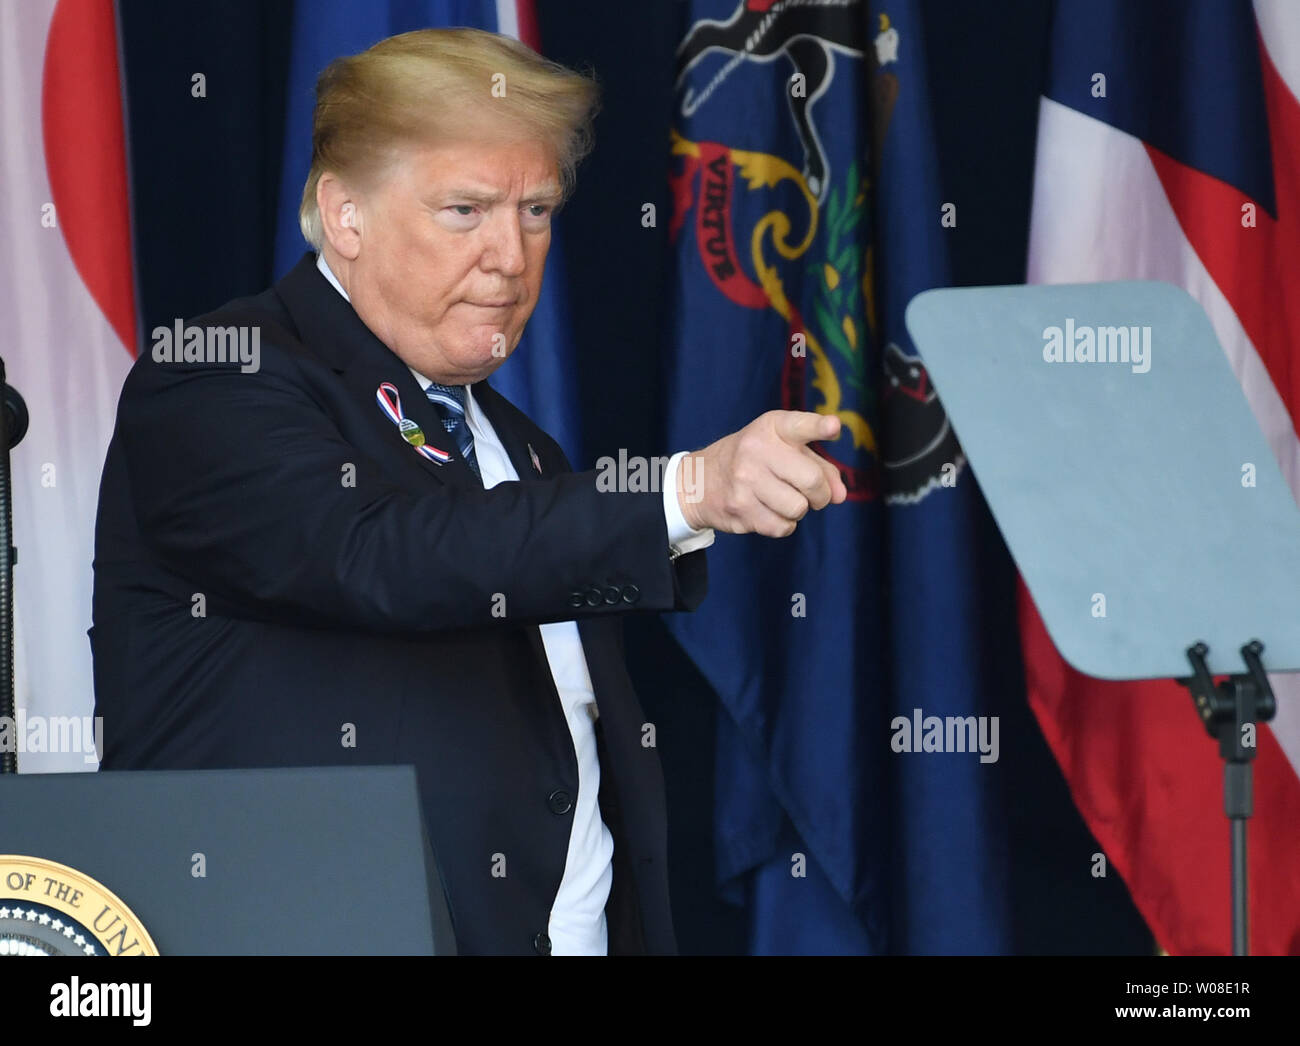 President Donald Trump speaks at a ceremony marking the 17th anniversary of 9/11 at the Flight 93 National Memorial in Shanksville, Pennsylvania on Tuesday, September 11, 2018. Flight 93 crashed during the September 11, 2001 terrorist attacks.         Photo by Pat Benic/UPI Stock Photo